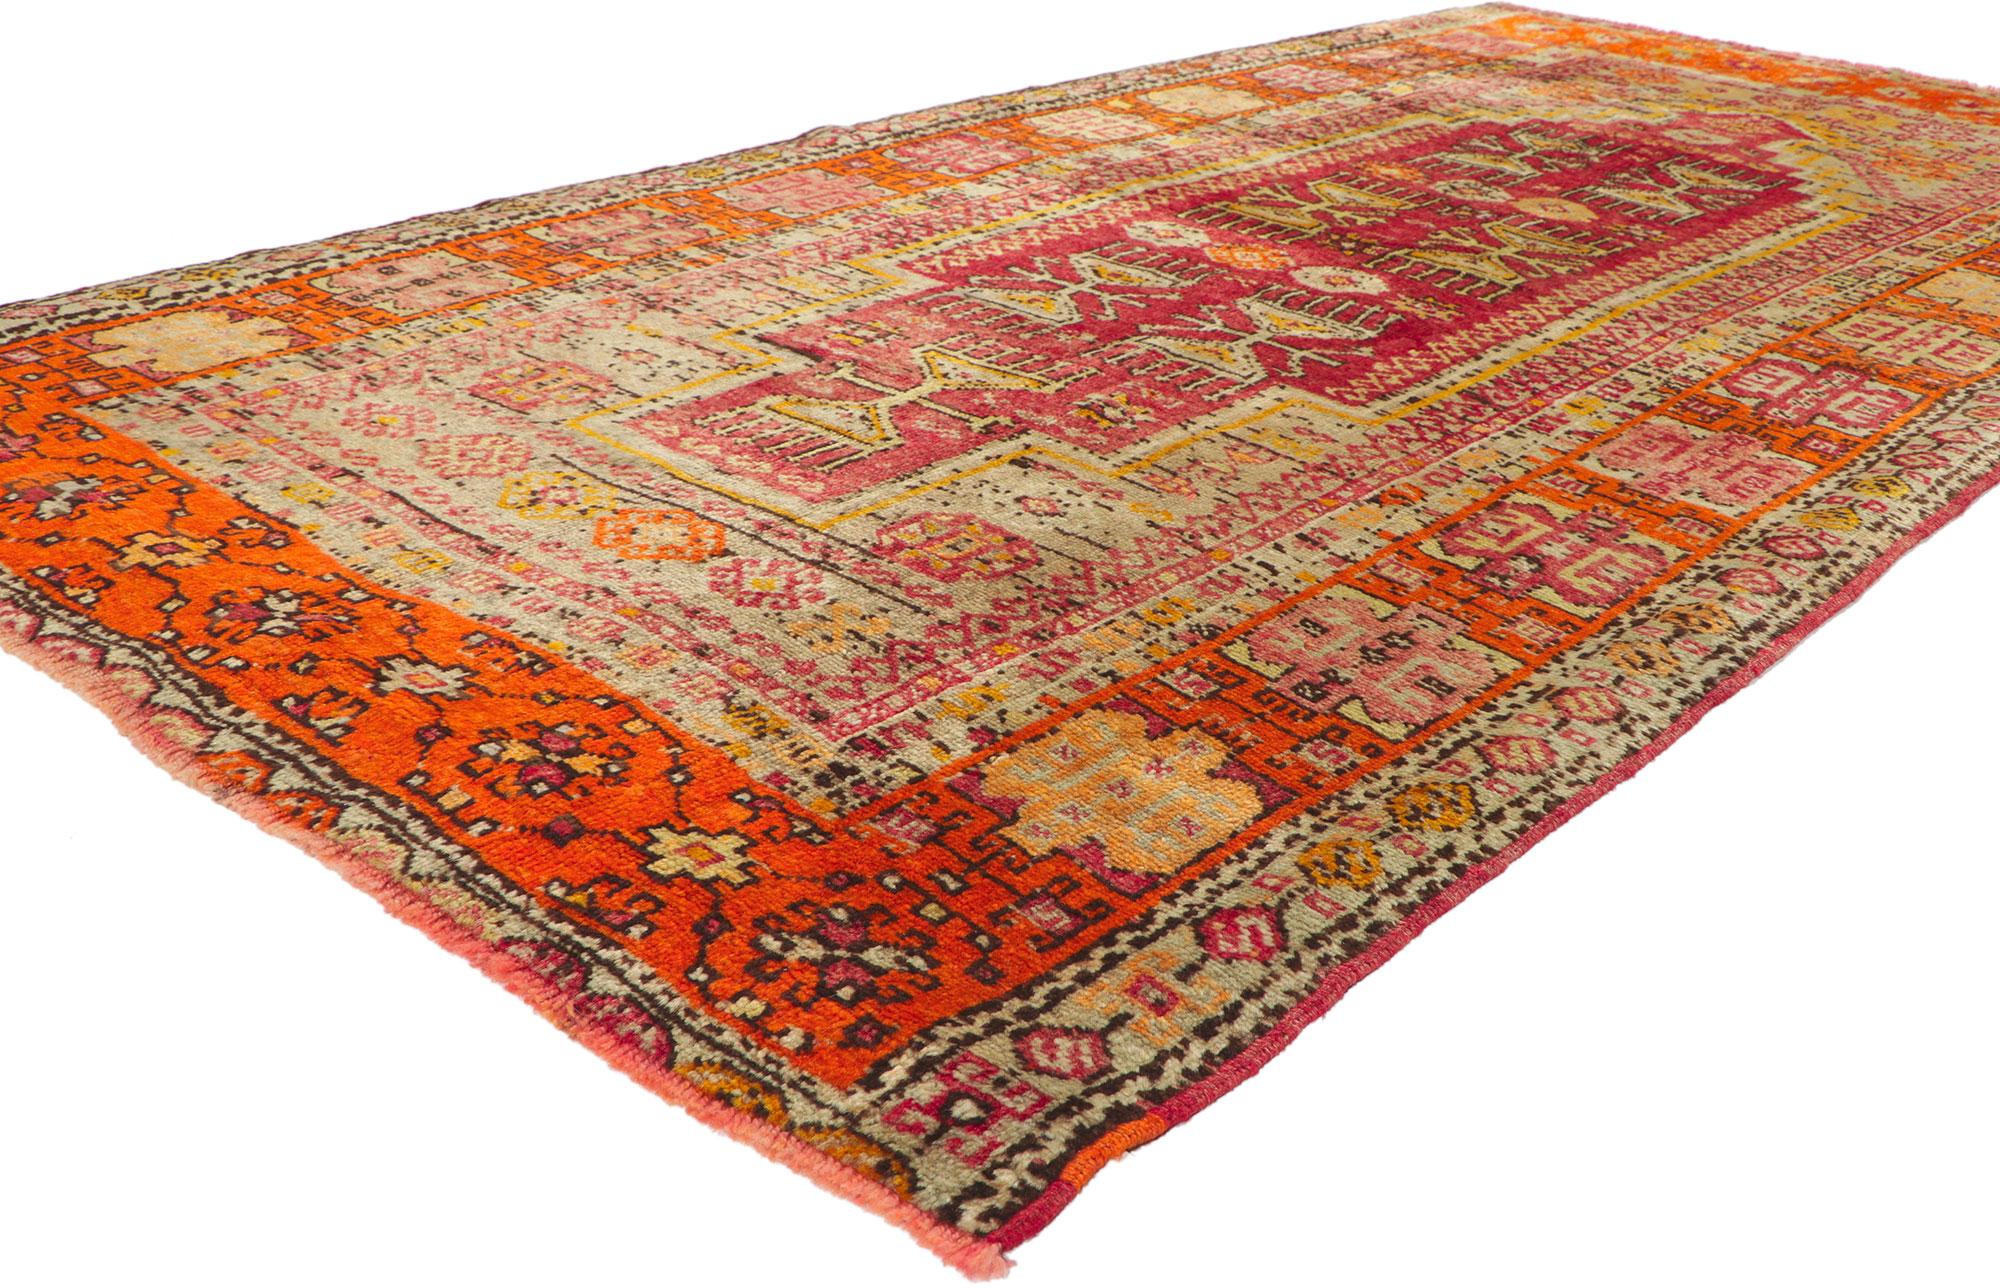 52442 Vintage Turkish Oushak Rug, 04’05 x 08’07. 
Bright orange hues burst forth from every detailed aspect of this vintage Turkish Oushak rug. Vibrant and versatile, this hand knotted wool vintage Turkish Oushak rug features a plethora of